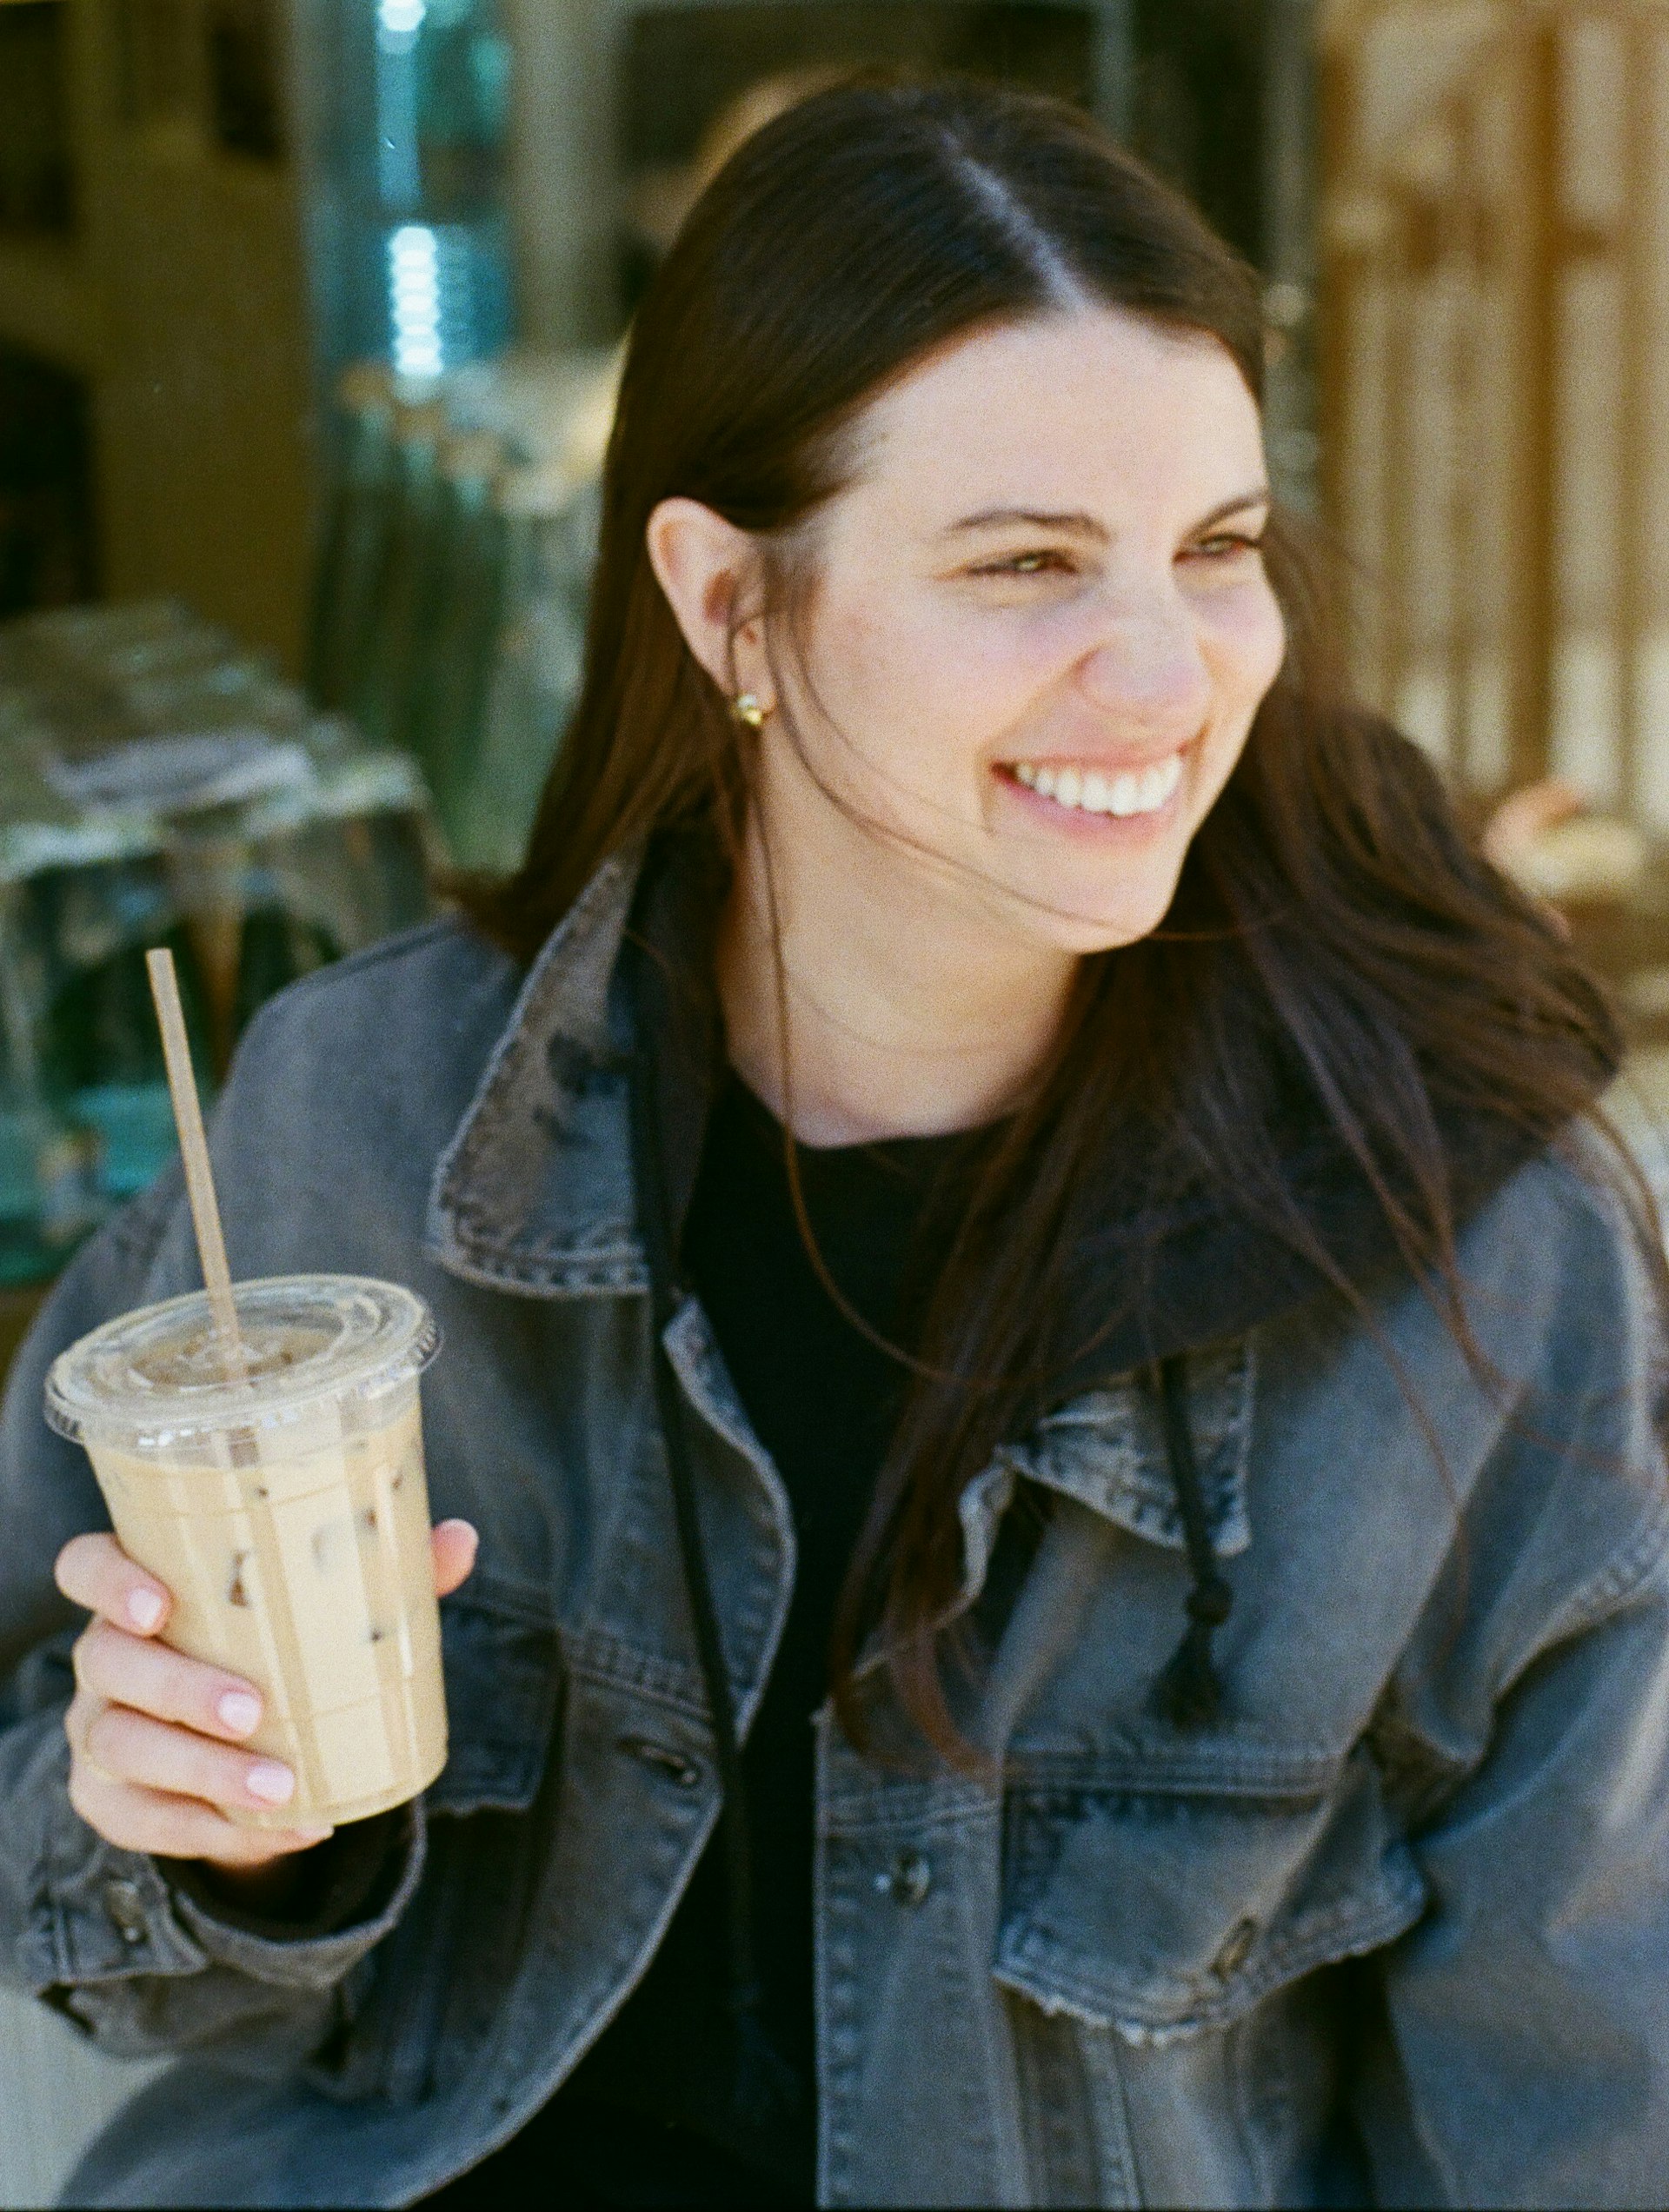 A woman sitting outside a coffee shop smiling and holding a latte